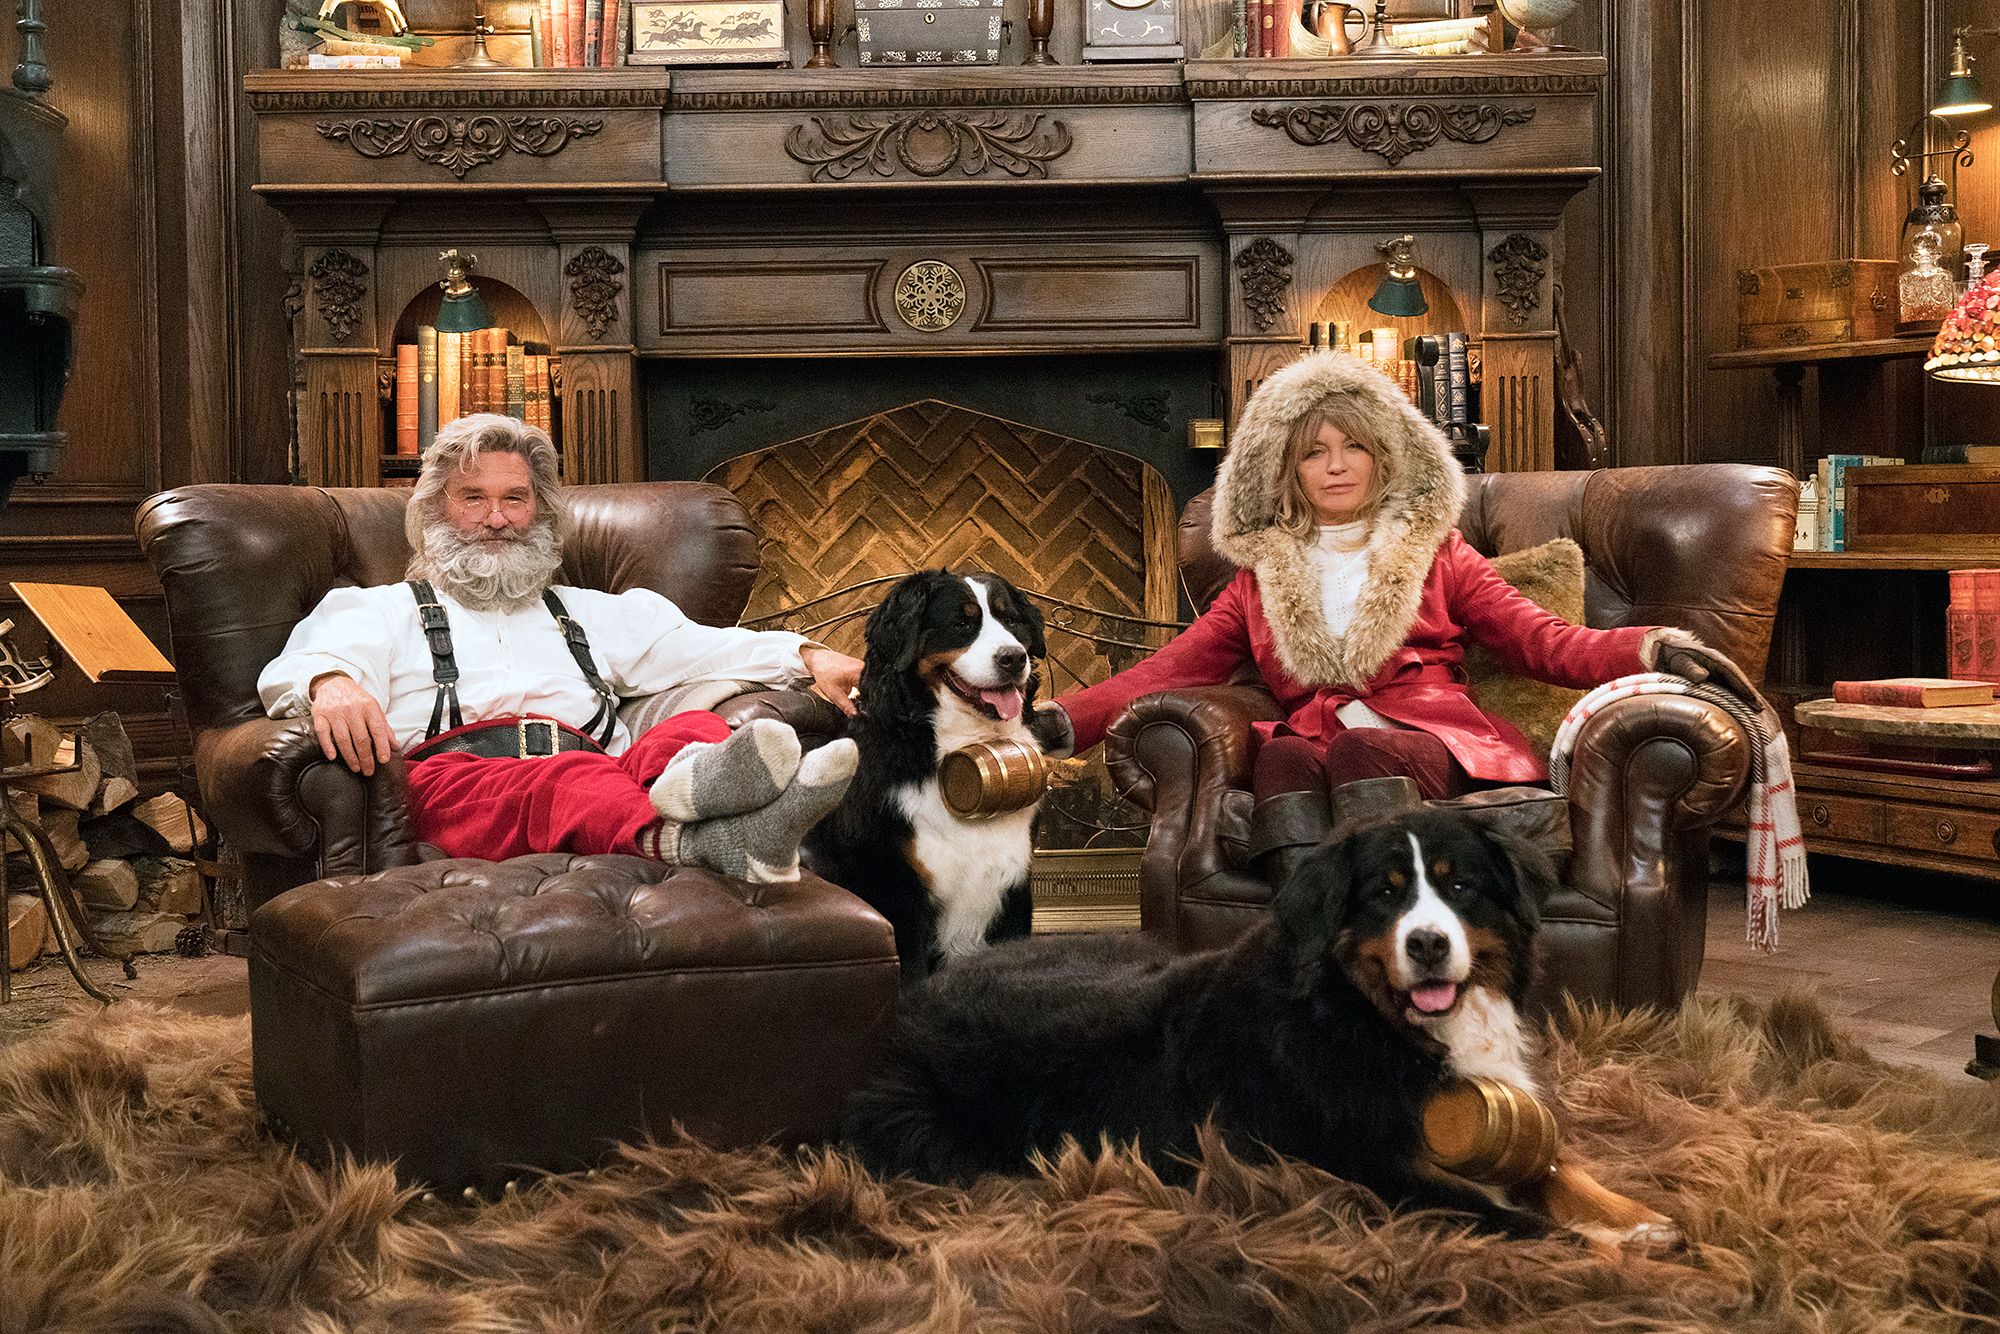 Goldie Hawn and Kurt Russell Dress as Sexy Mr. and Mrs. Claus: ‘Never Thought I’d Be Sleeping ...